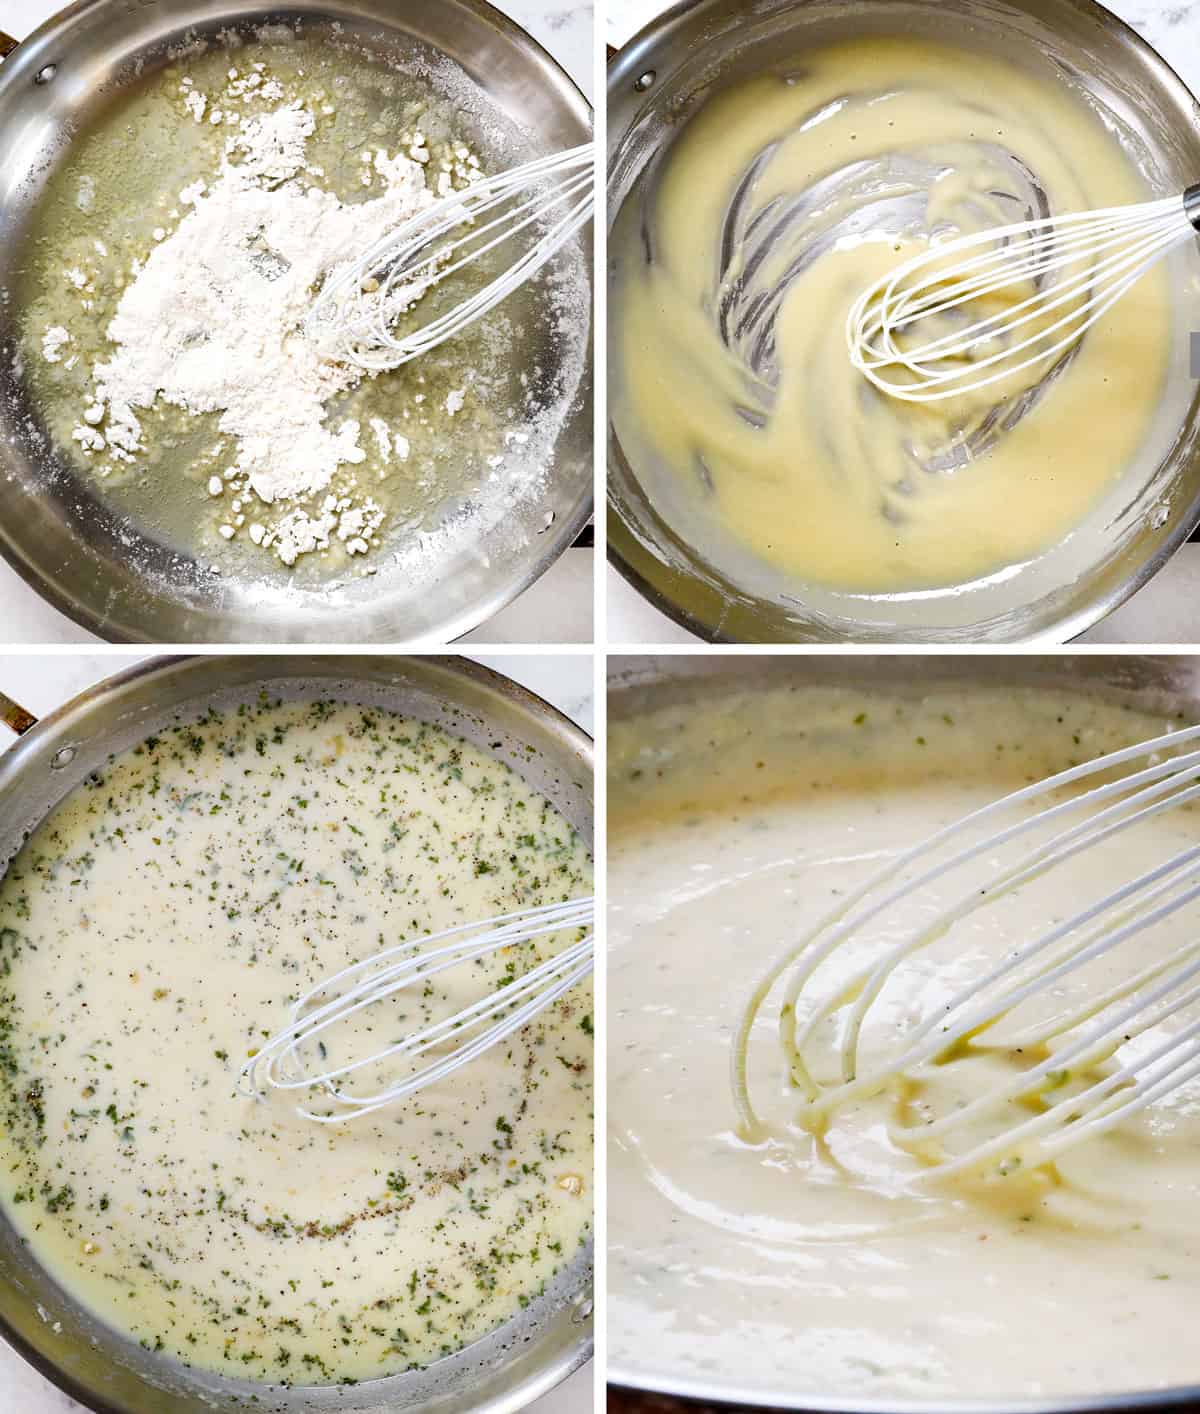 a collage showing how to make broccoli casserole by making a cheese sauce by cooking flour, then whisking in broth, adding seasoning, then simmering until thickened